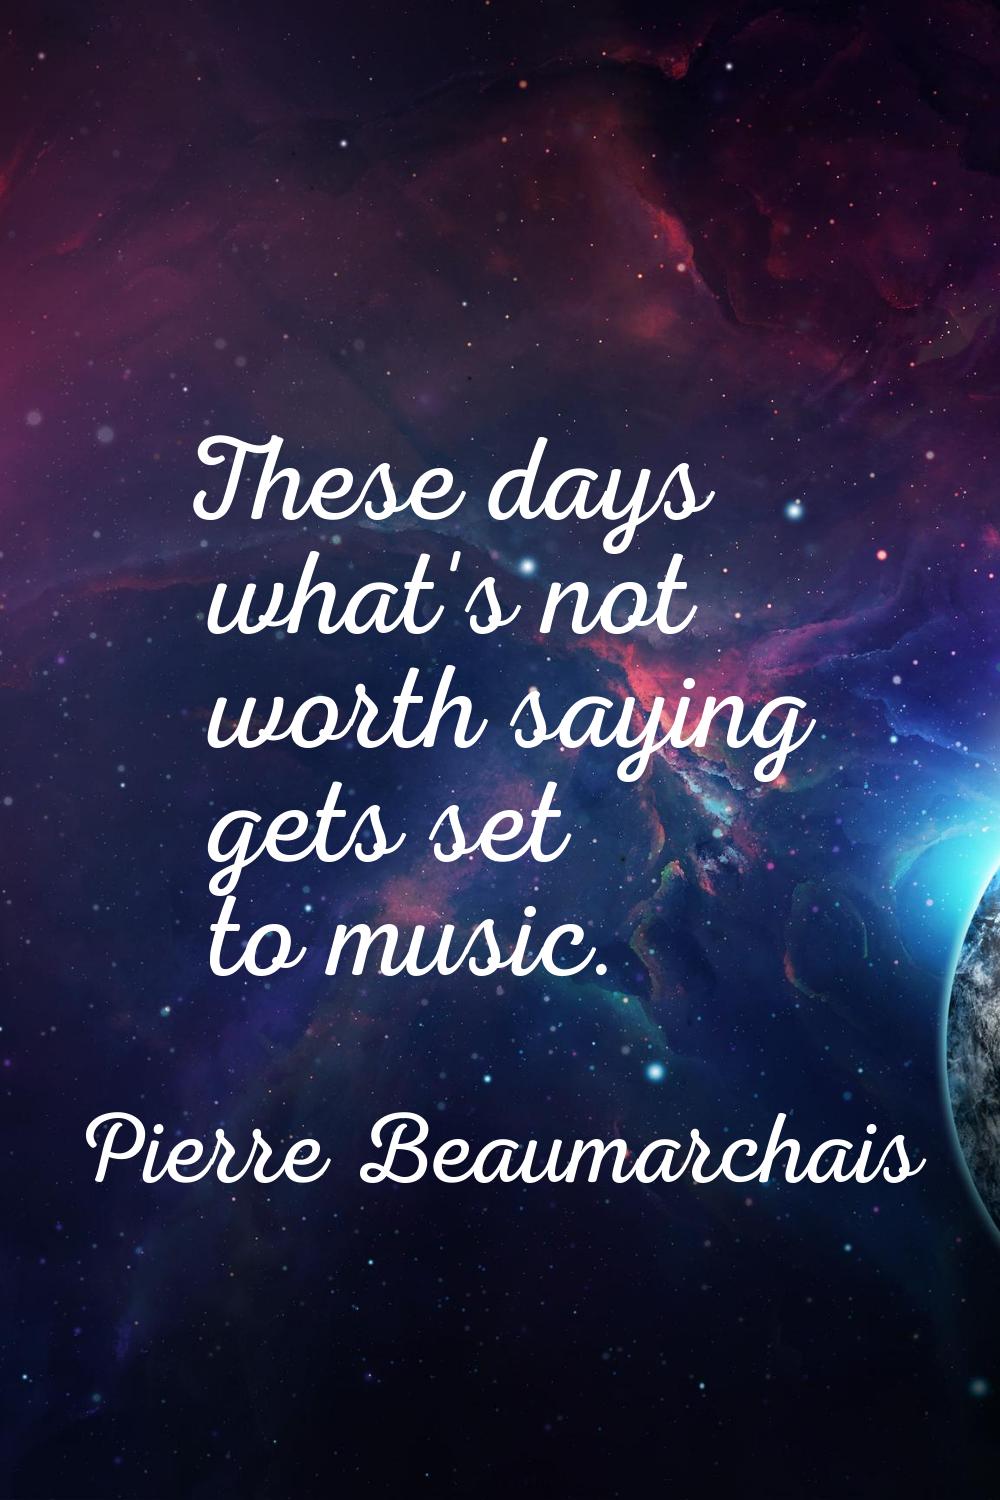 These days what's not worth saying gets set to music.